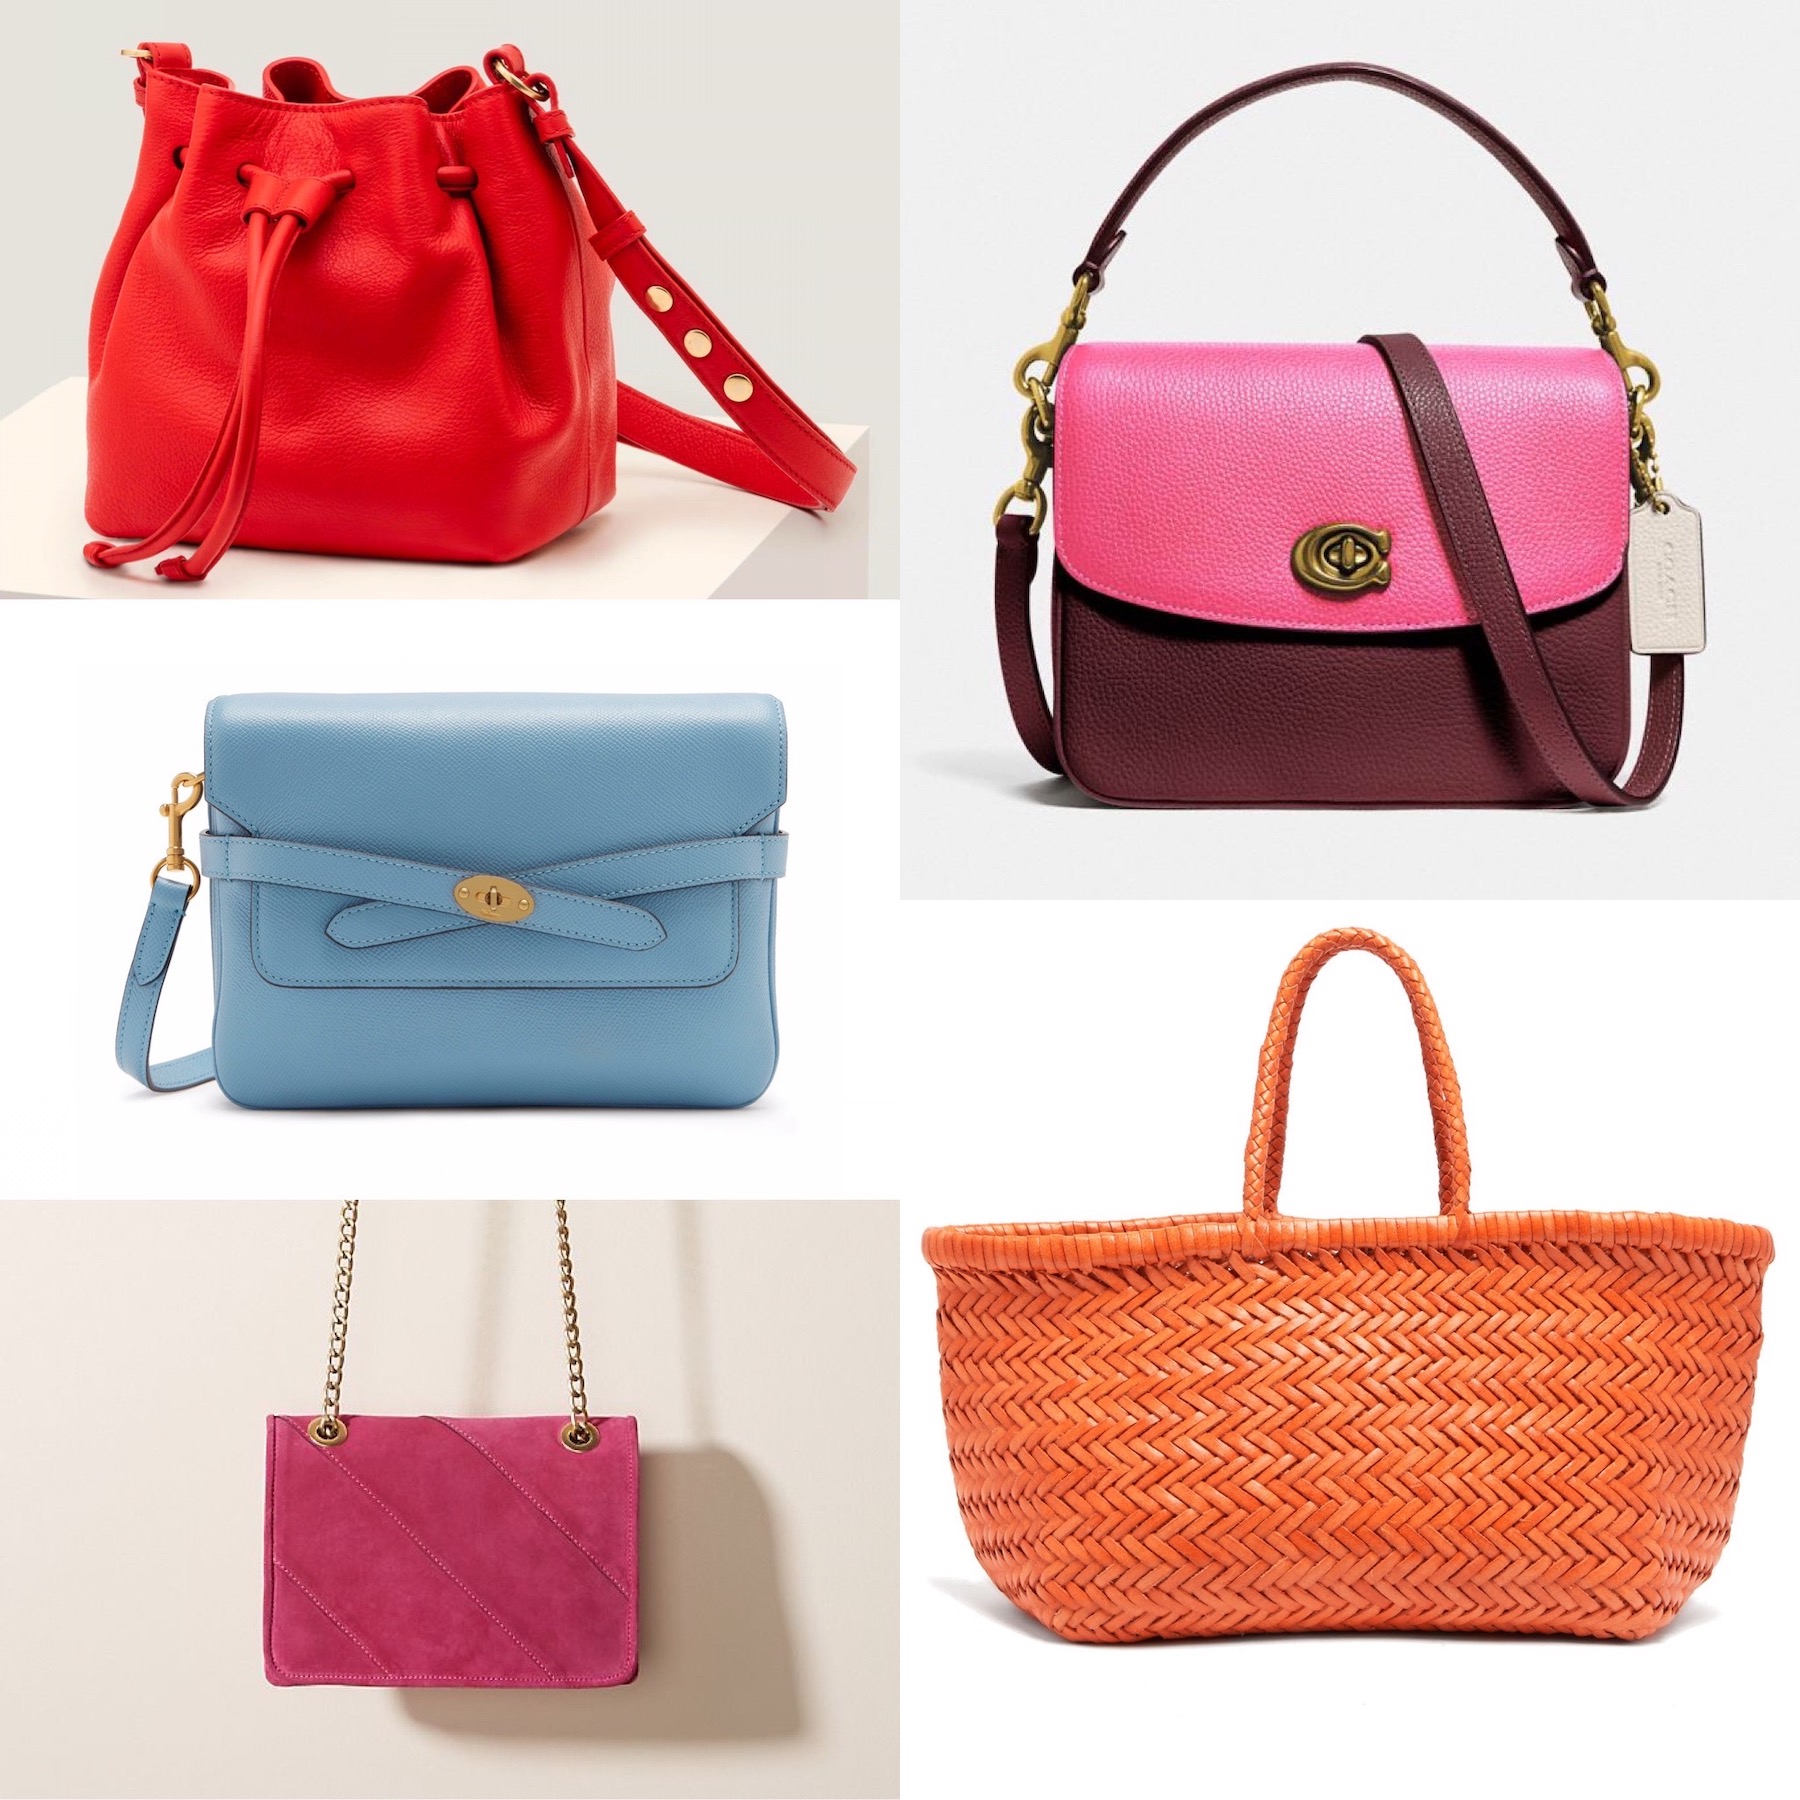 5 Colourful Handbags To Brighten Up Your Summer Outfits